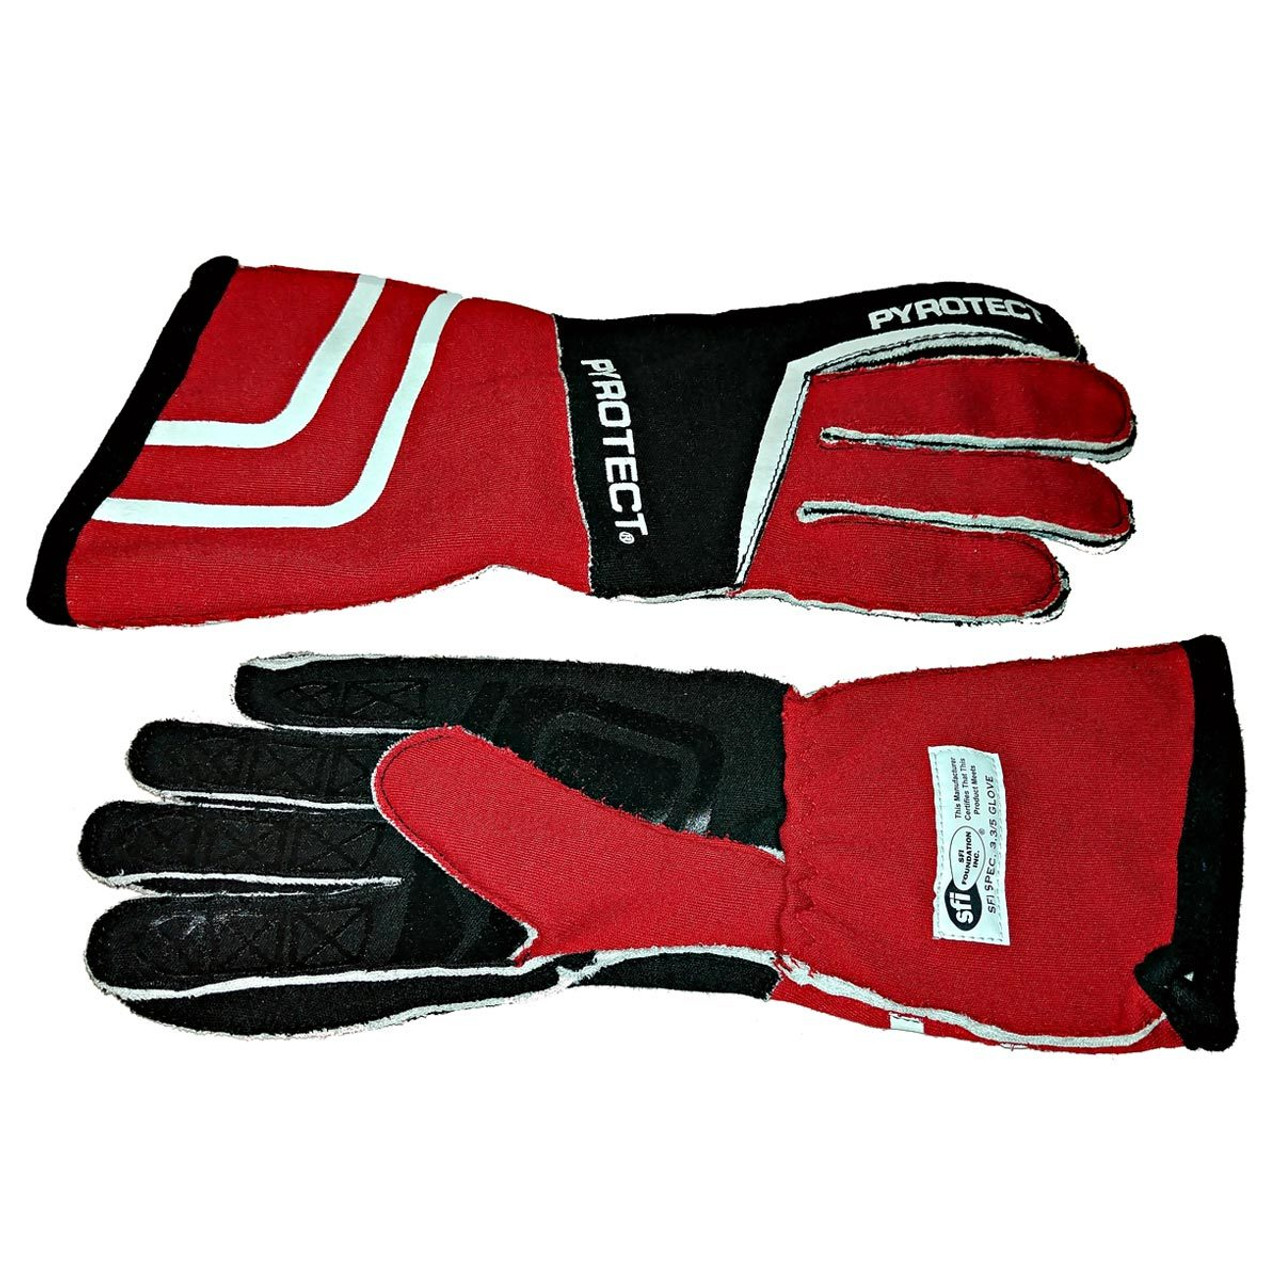 Pyrotect Glove Sport 2 Layer Blk /Red Med SFI-5